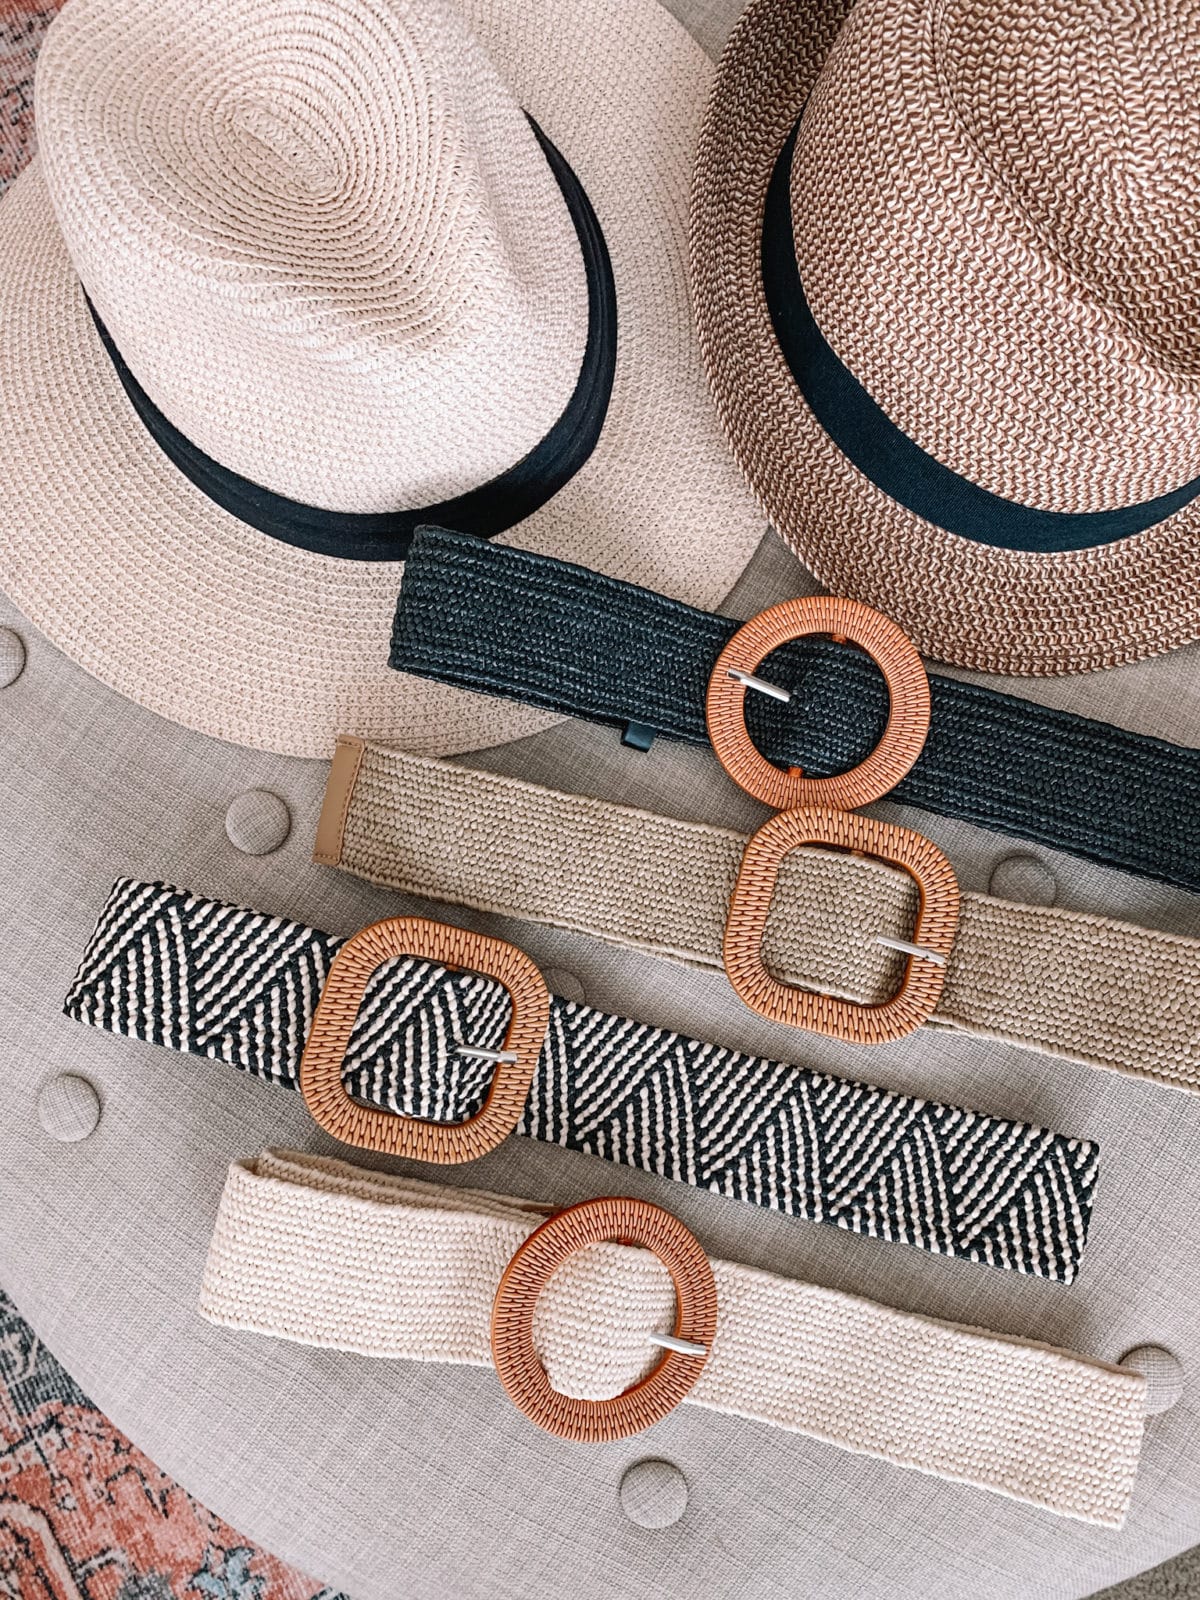 woven belts and hats